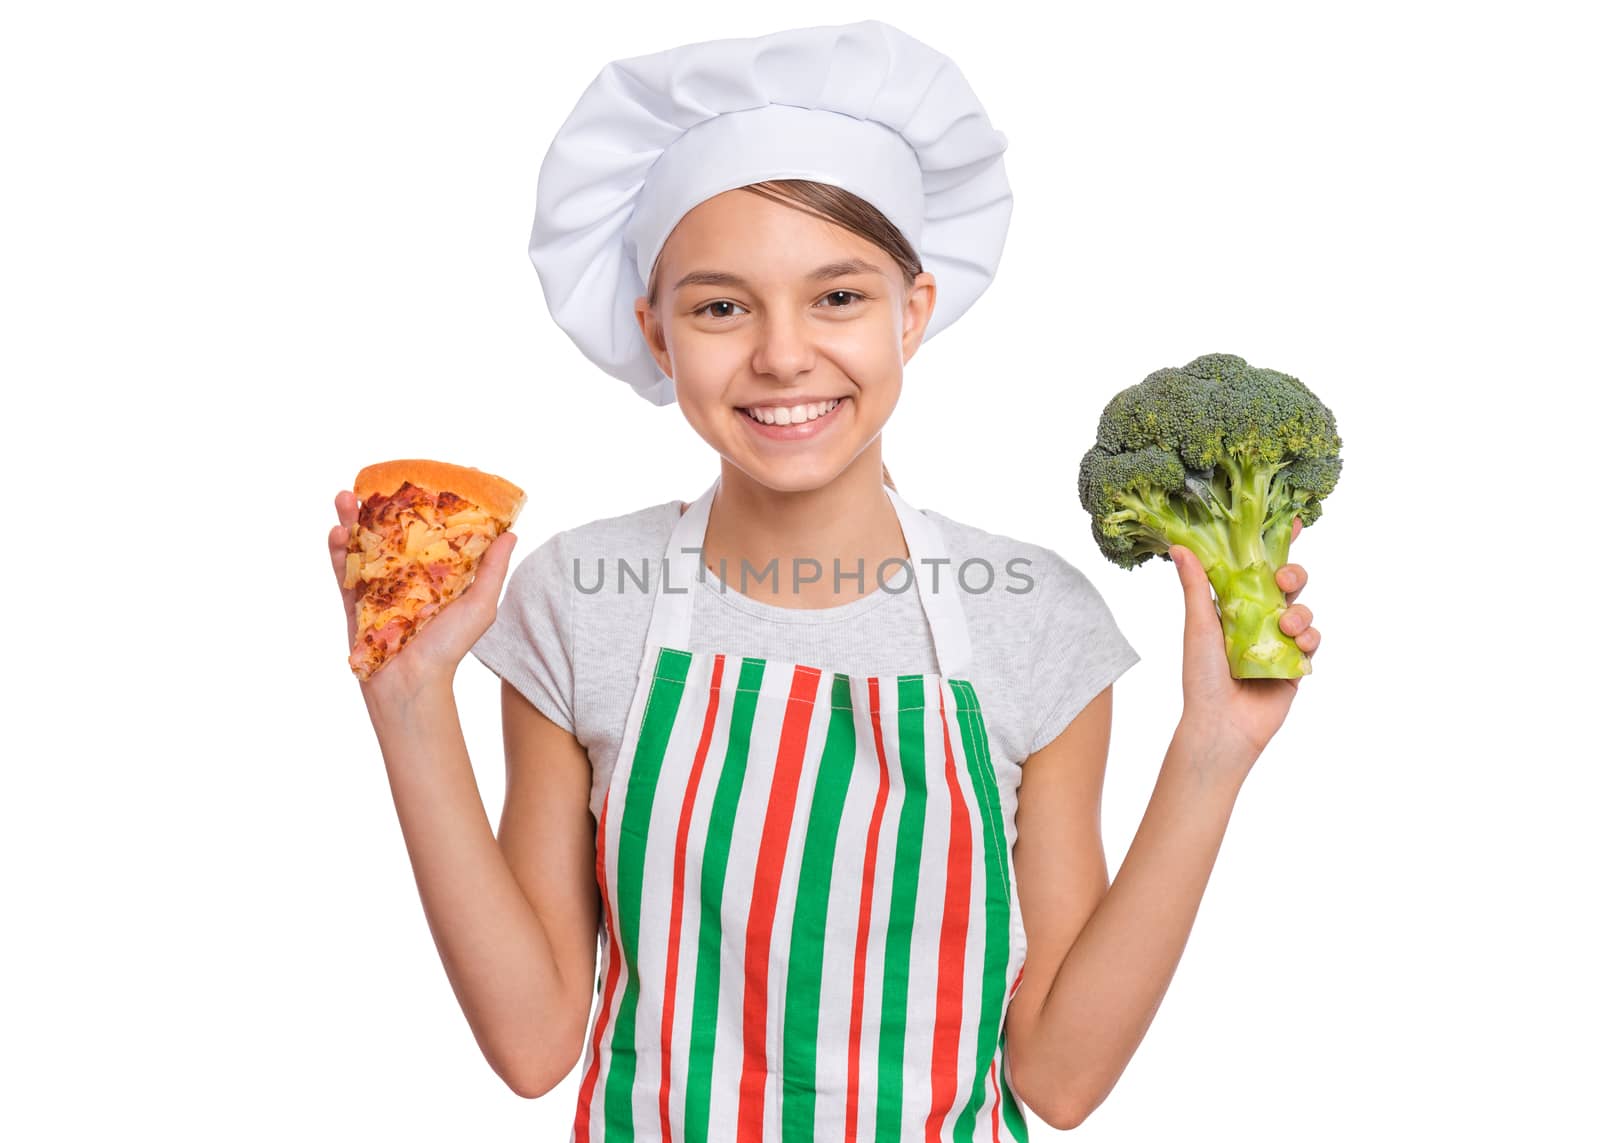 Girl wearing a chef's hat with emotions holding groceries in hands, isolated on white background.